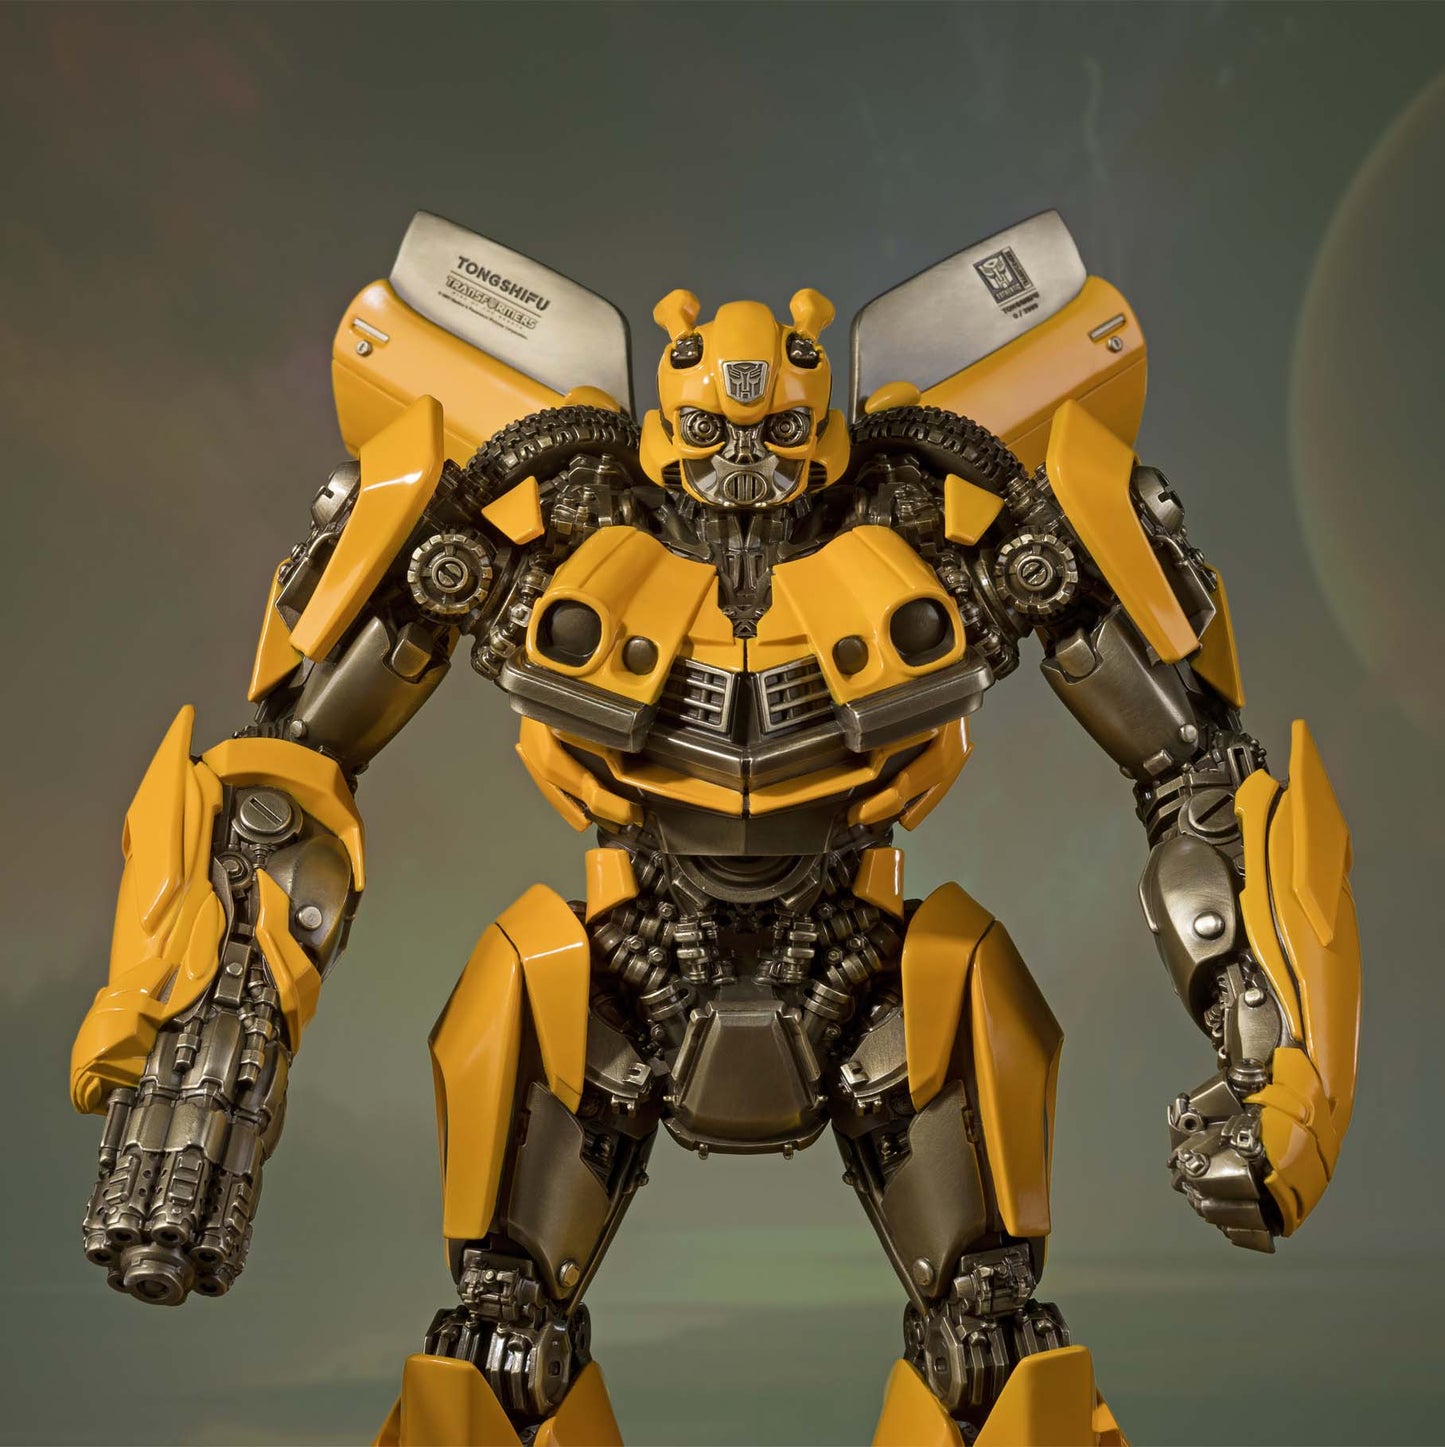 Transformers: Bumblebee Movie Craft - Rise of Beasts - Anbocundish